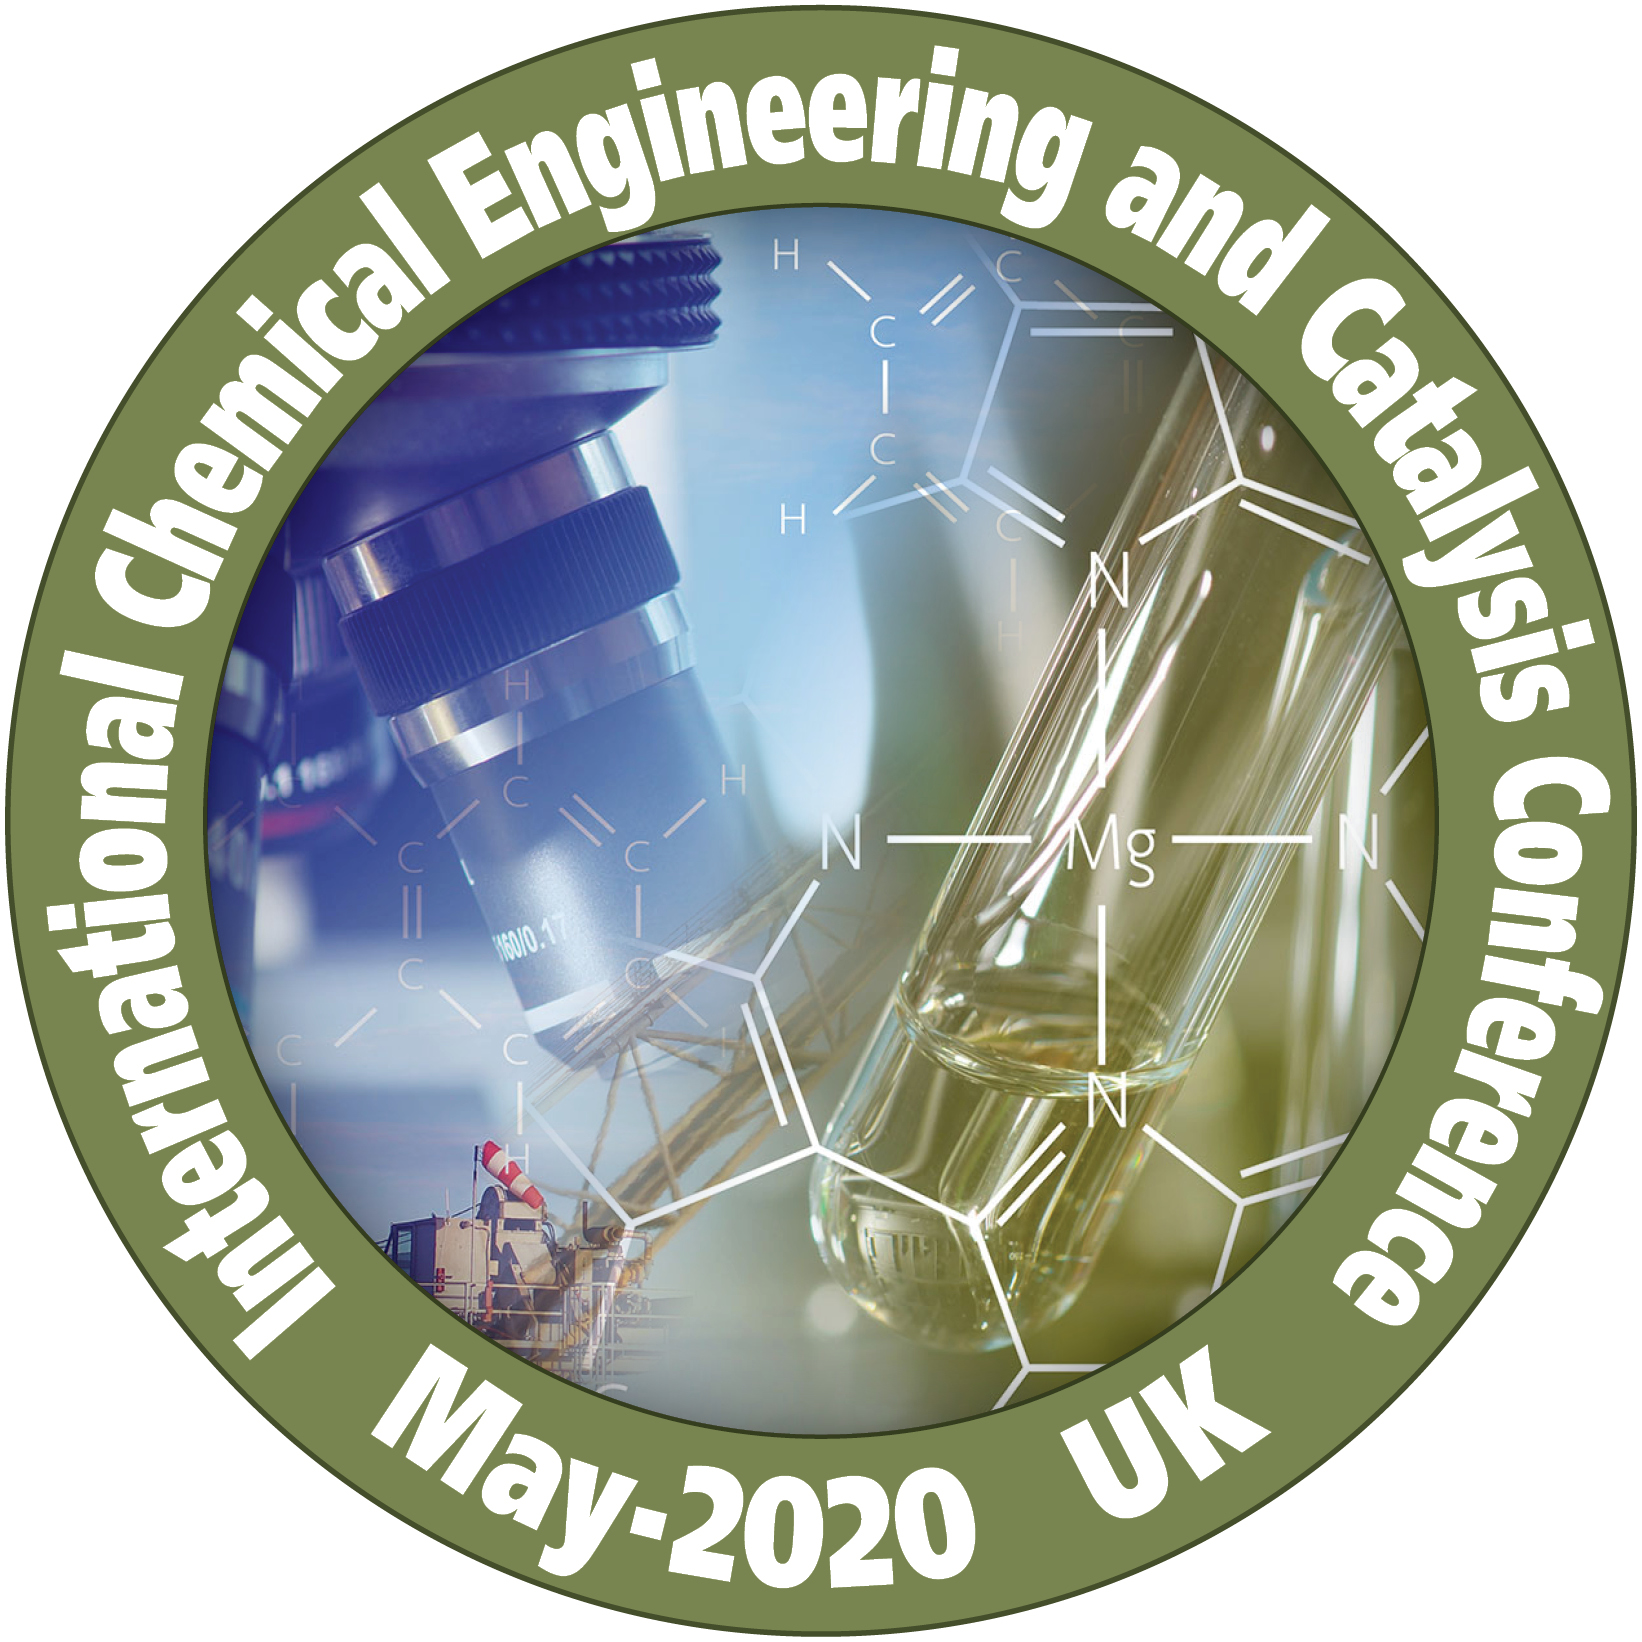 International Chemical Engineering and Catalysis Conference, London, United Kingdom